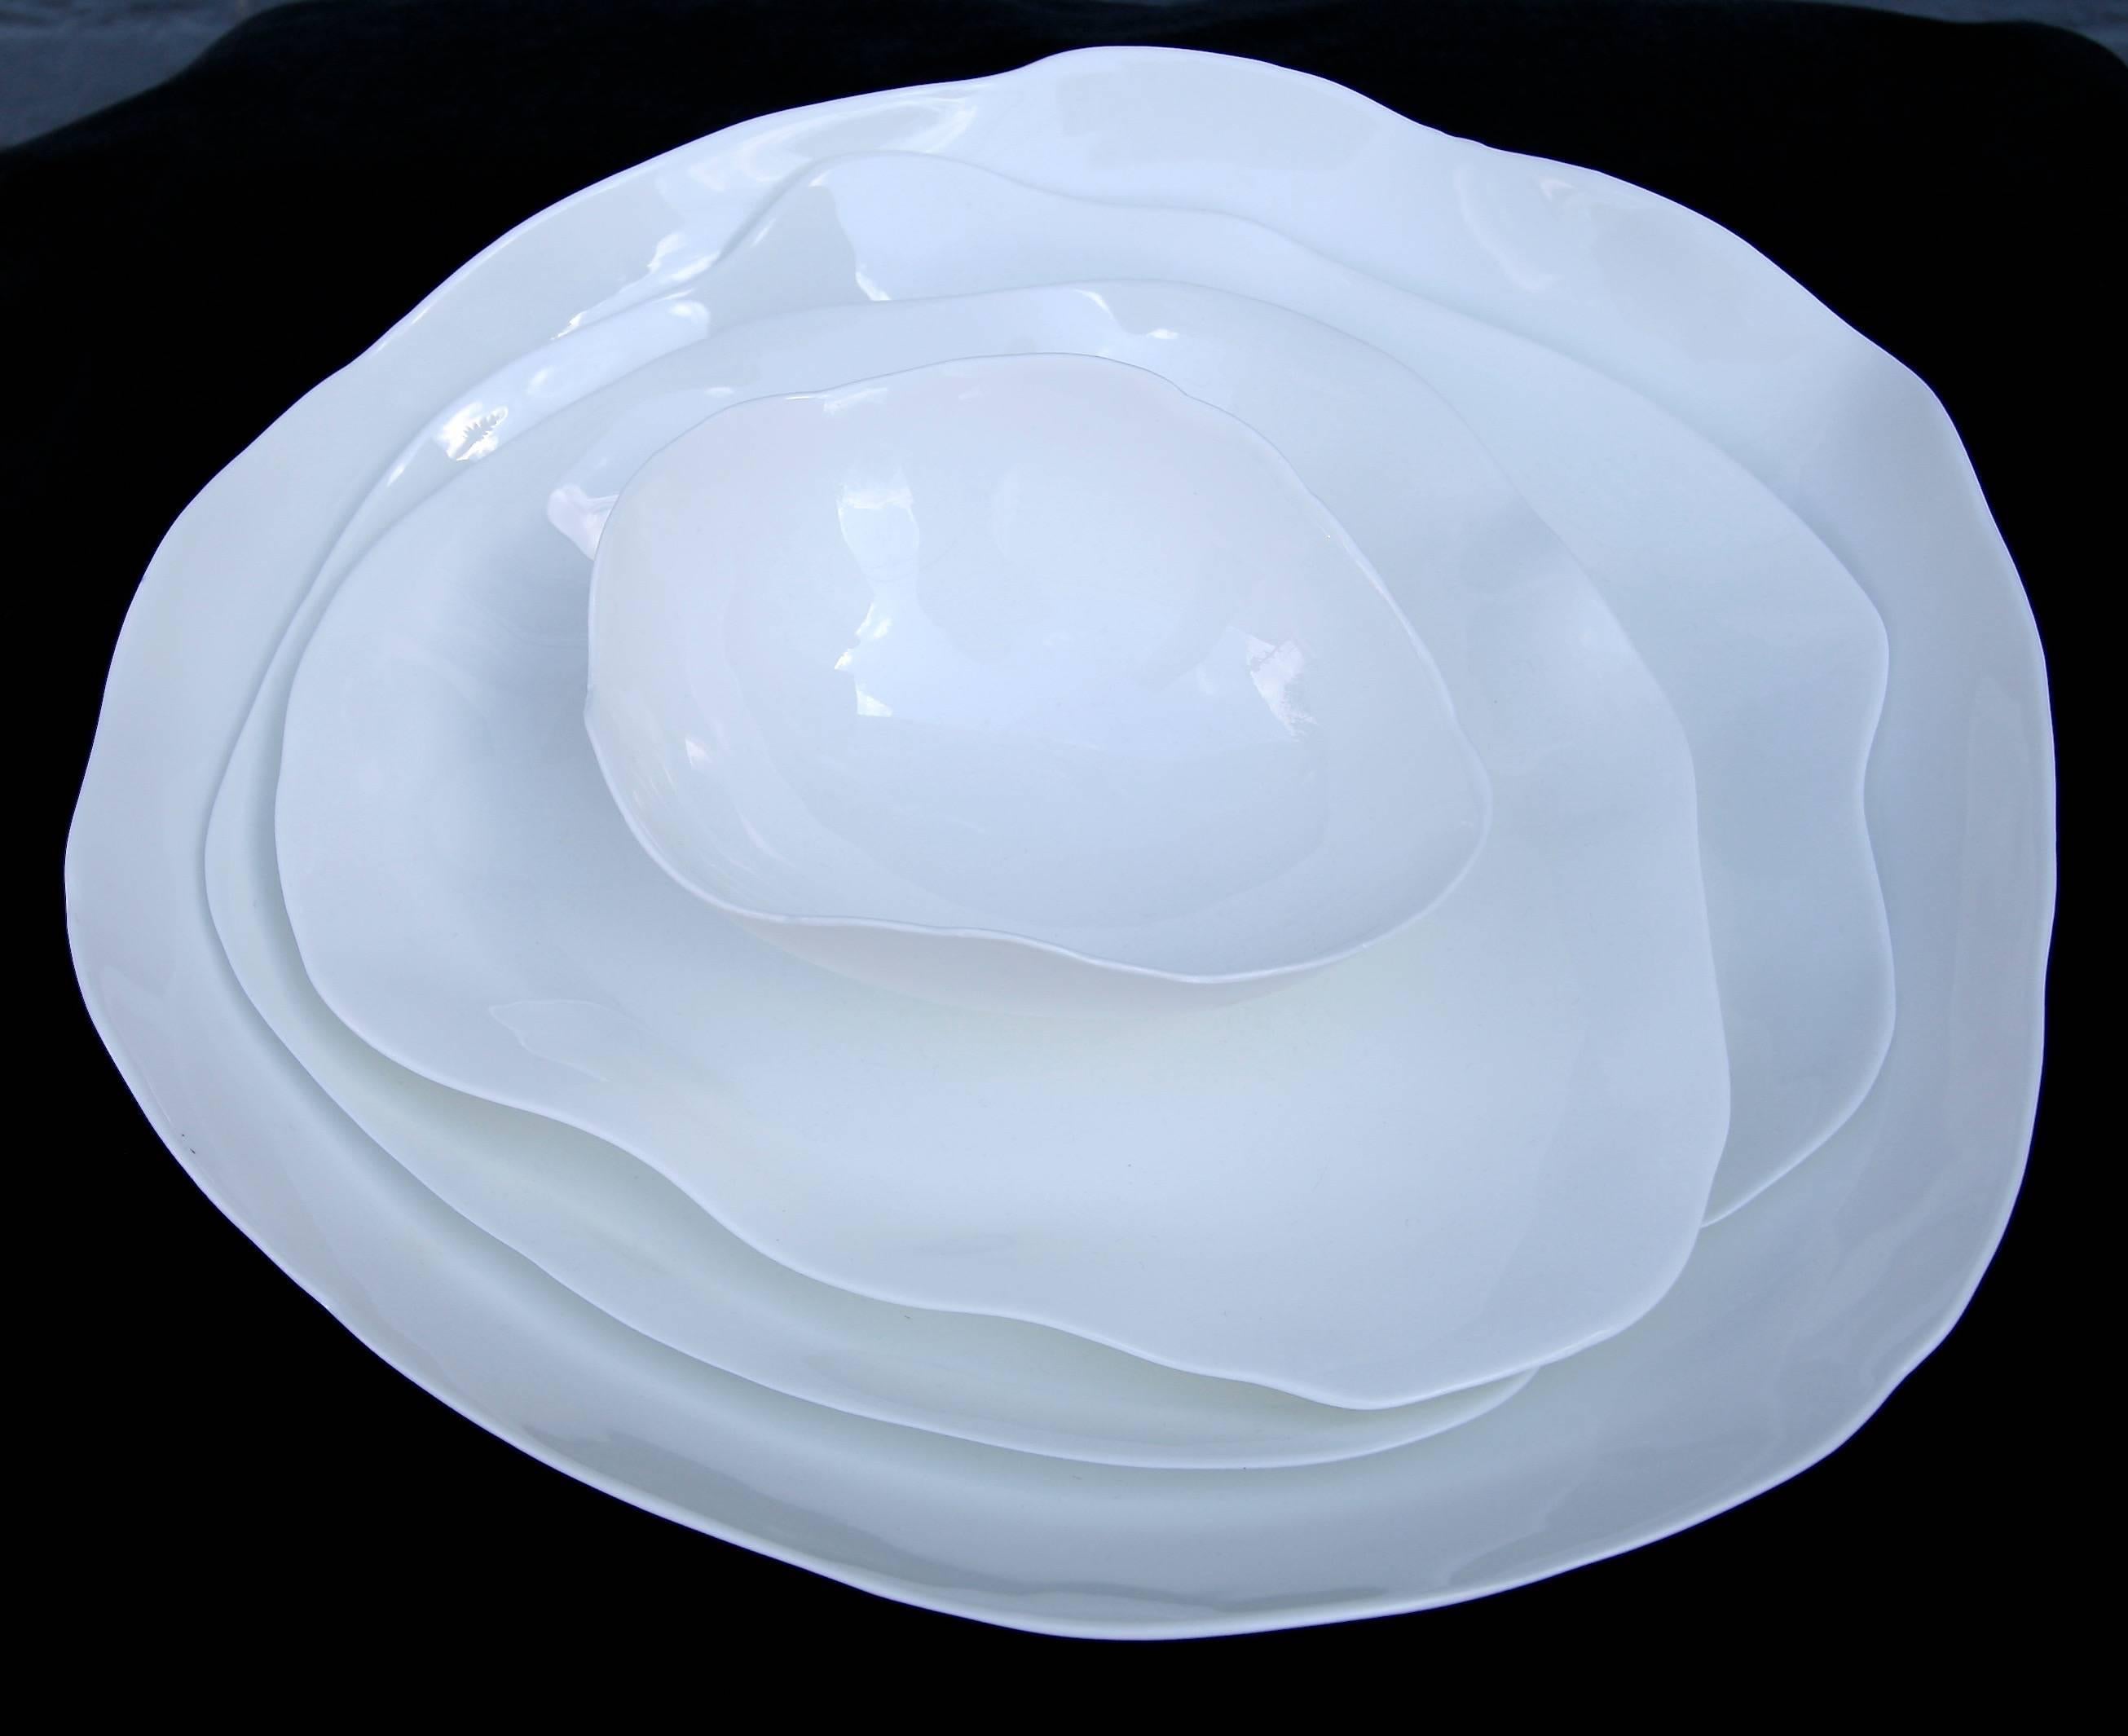 Stunning white bone china tableware by Roos Van de Velde from the line perfect imperfection for Serax. Priced individually not as a set.

Measures: Bowl $65 (6.25